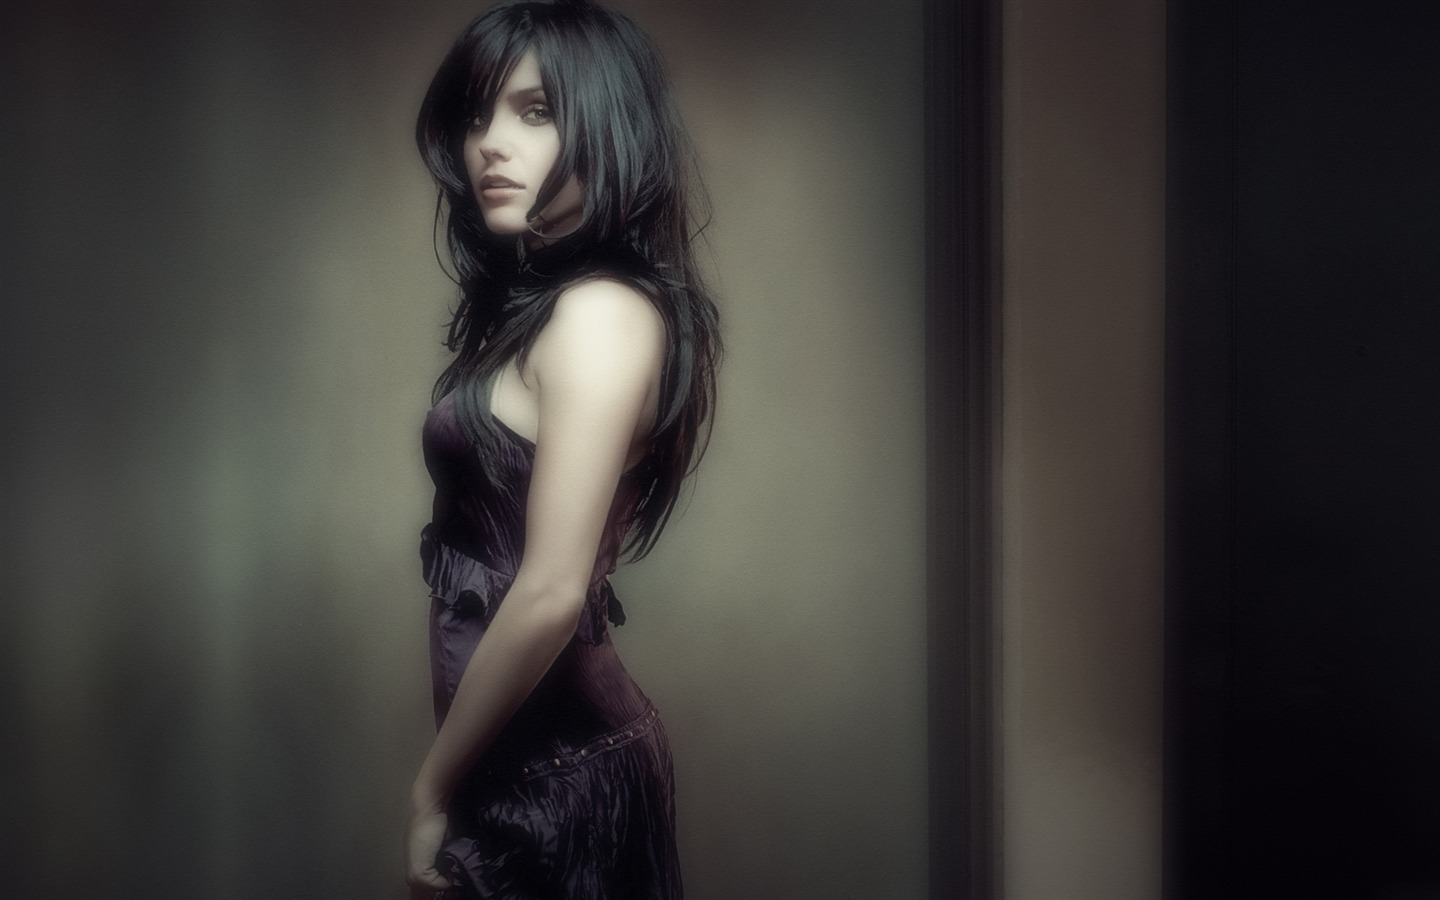 Widescreen Wallpaper Collection actrice (7) #16 - 1440x900